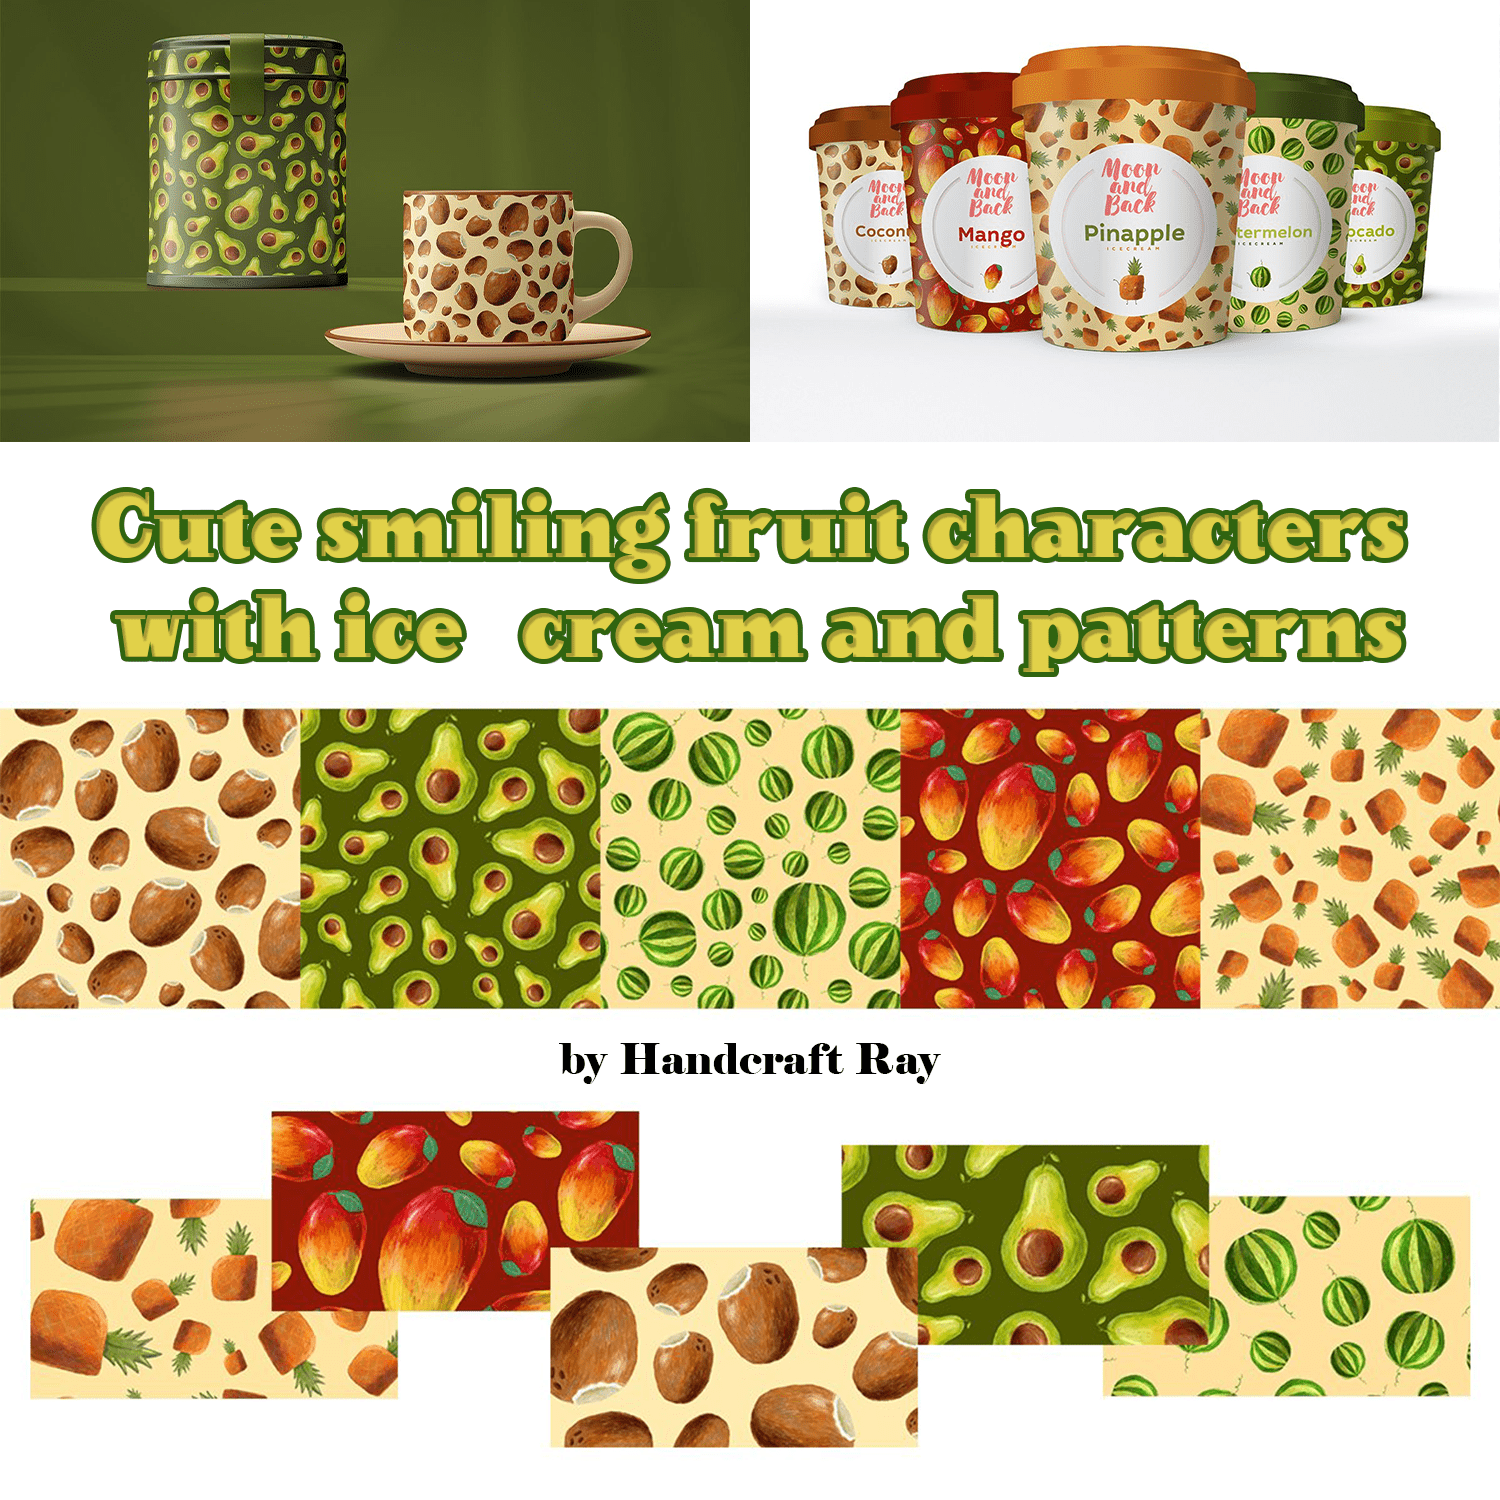 Cute smiling fruit characters with ice cream and patterns created by Handcraft Ray.